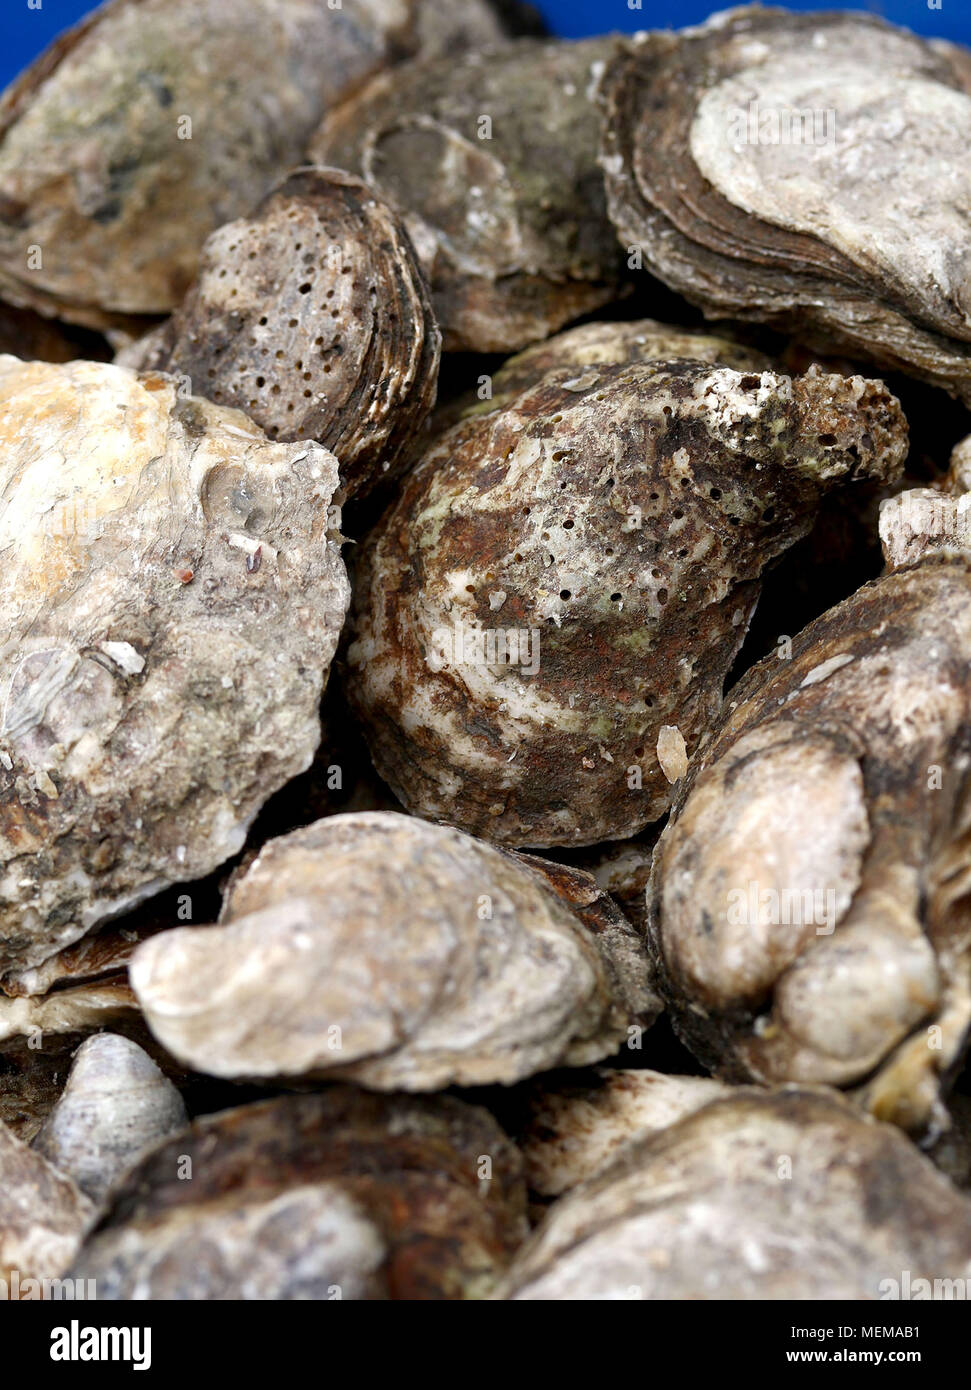 Oysters at Fish Market Stock Photo